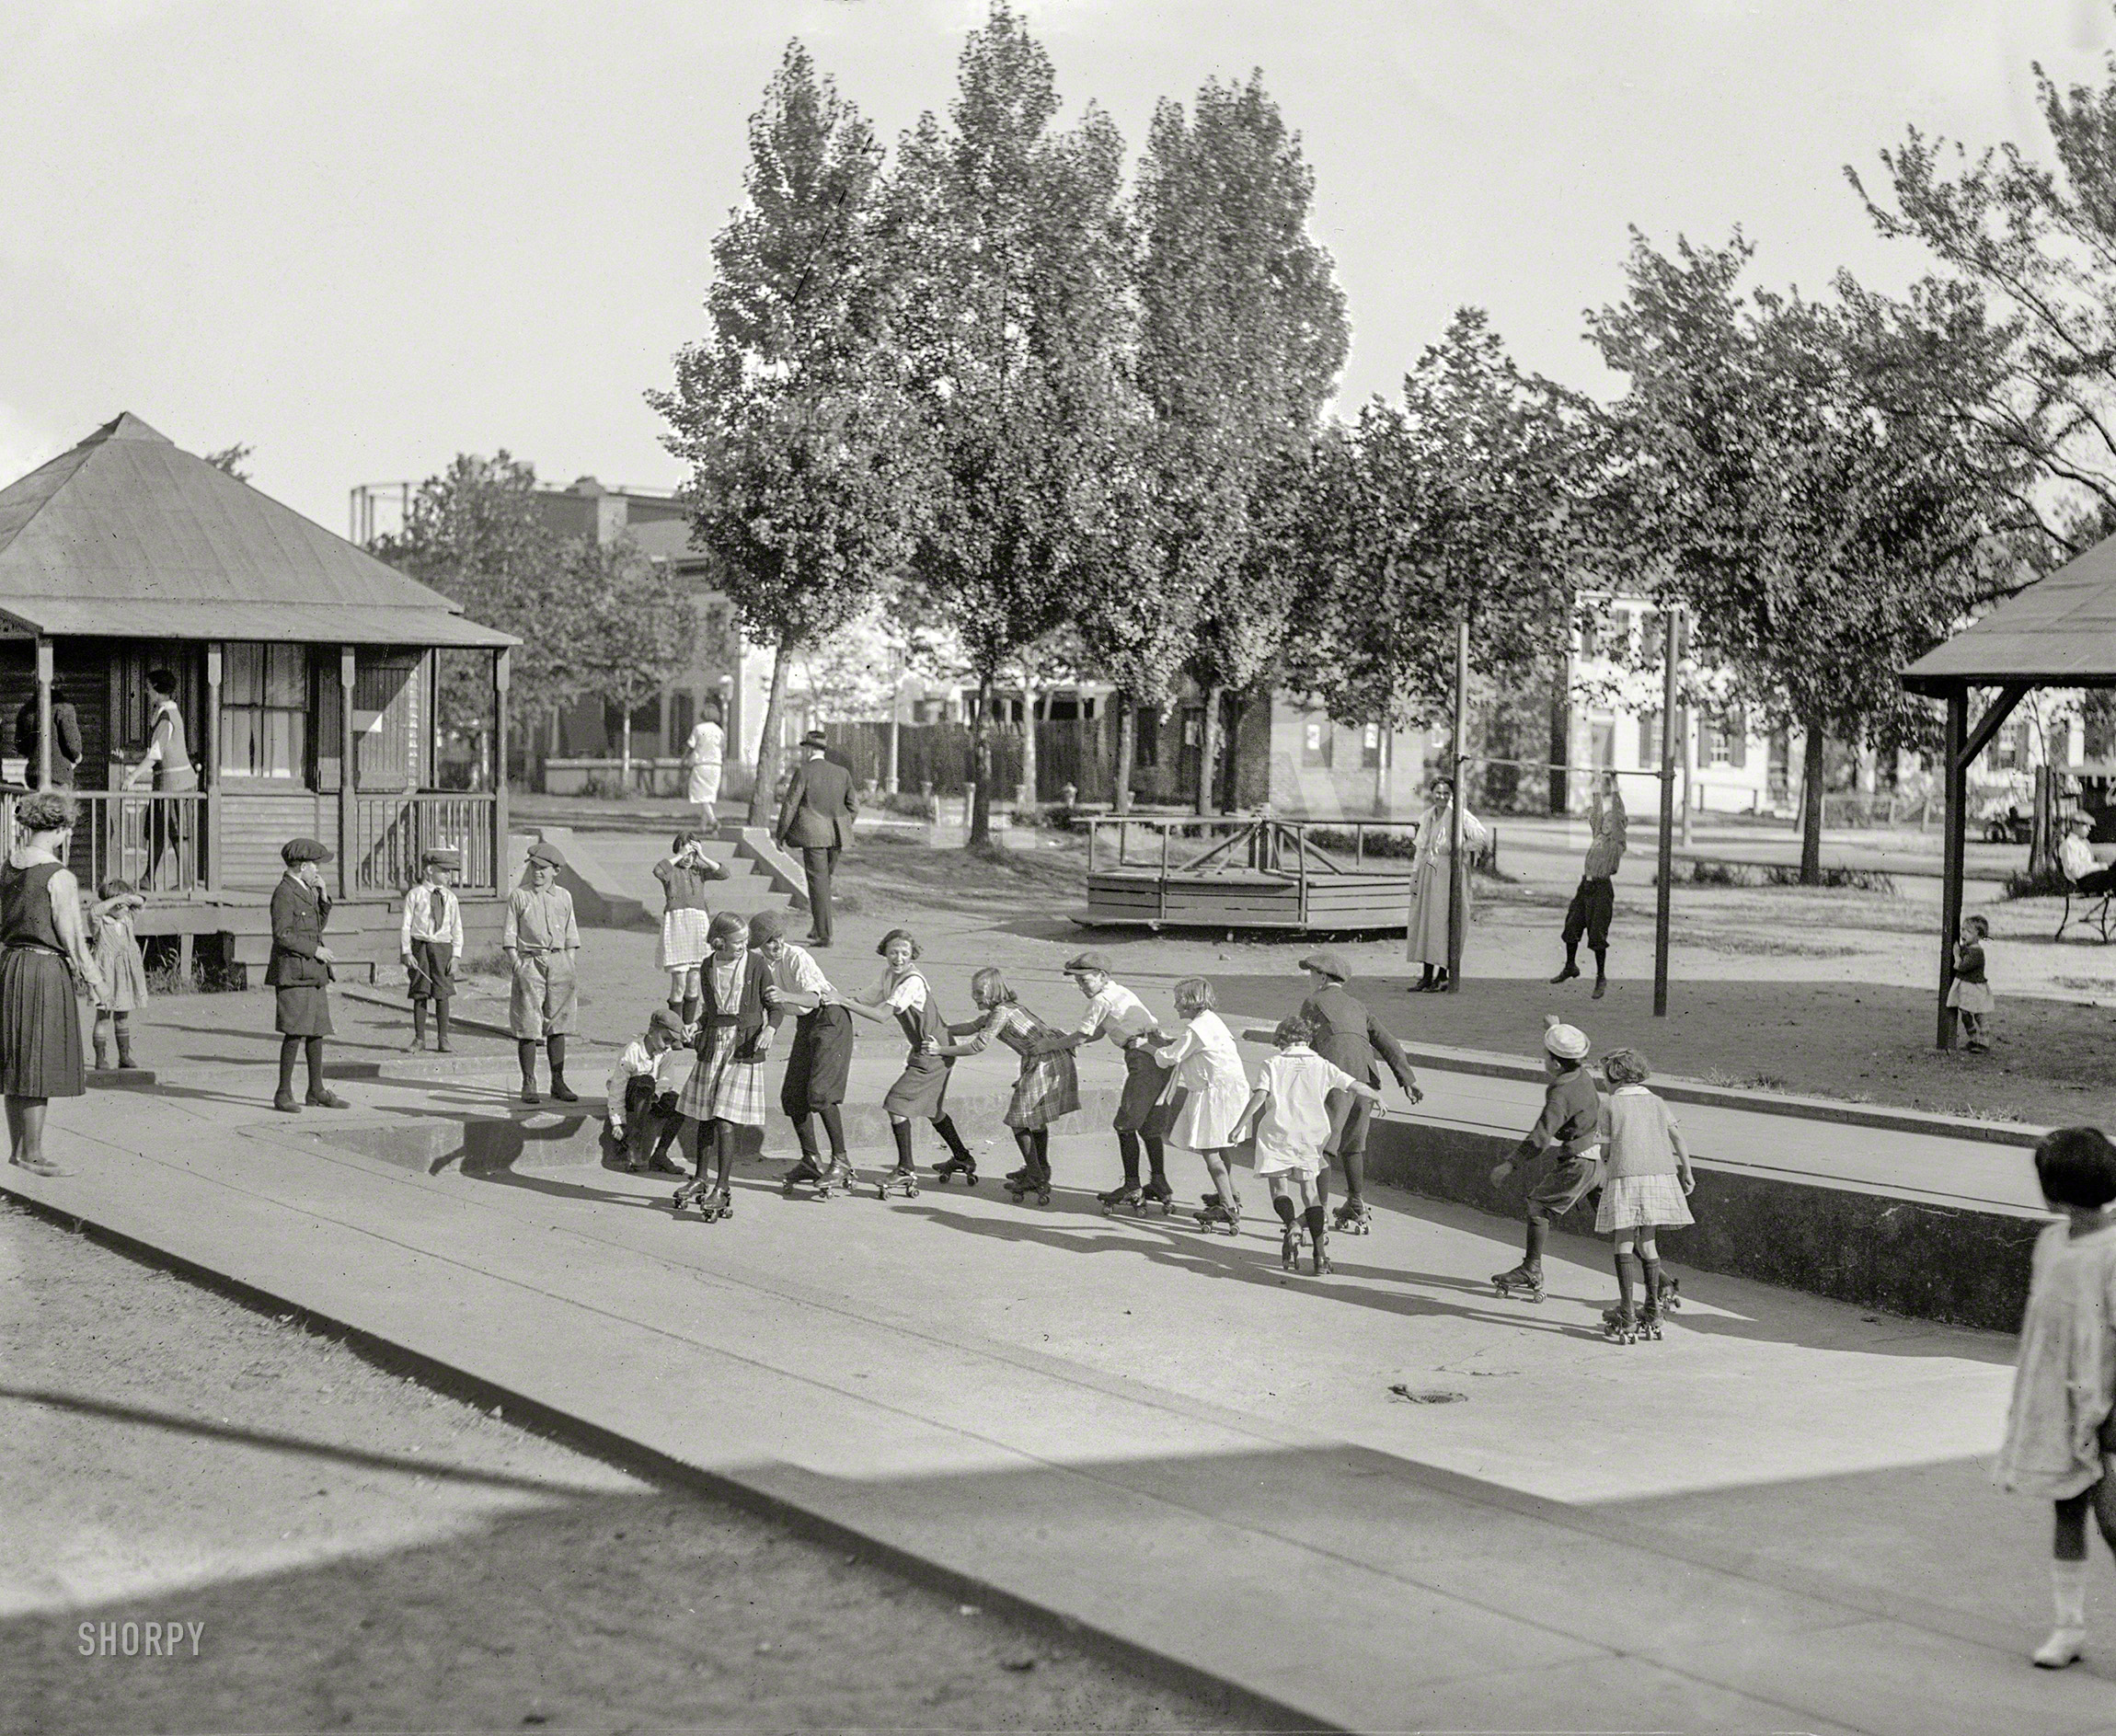 September 26, 1922. Washington, D.C. "Virginia Avenue playgrounds." Equipped with a skate pit. National Photo Company glass negative. View full size.